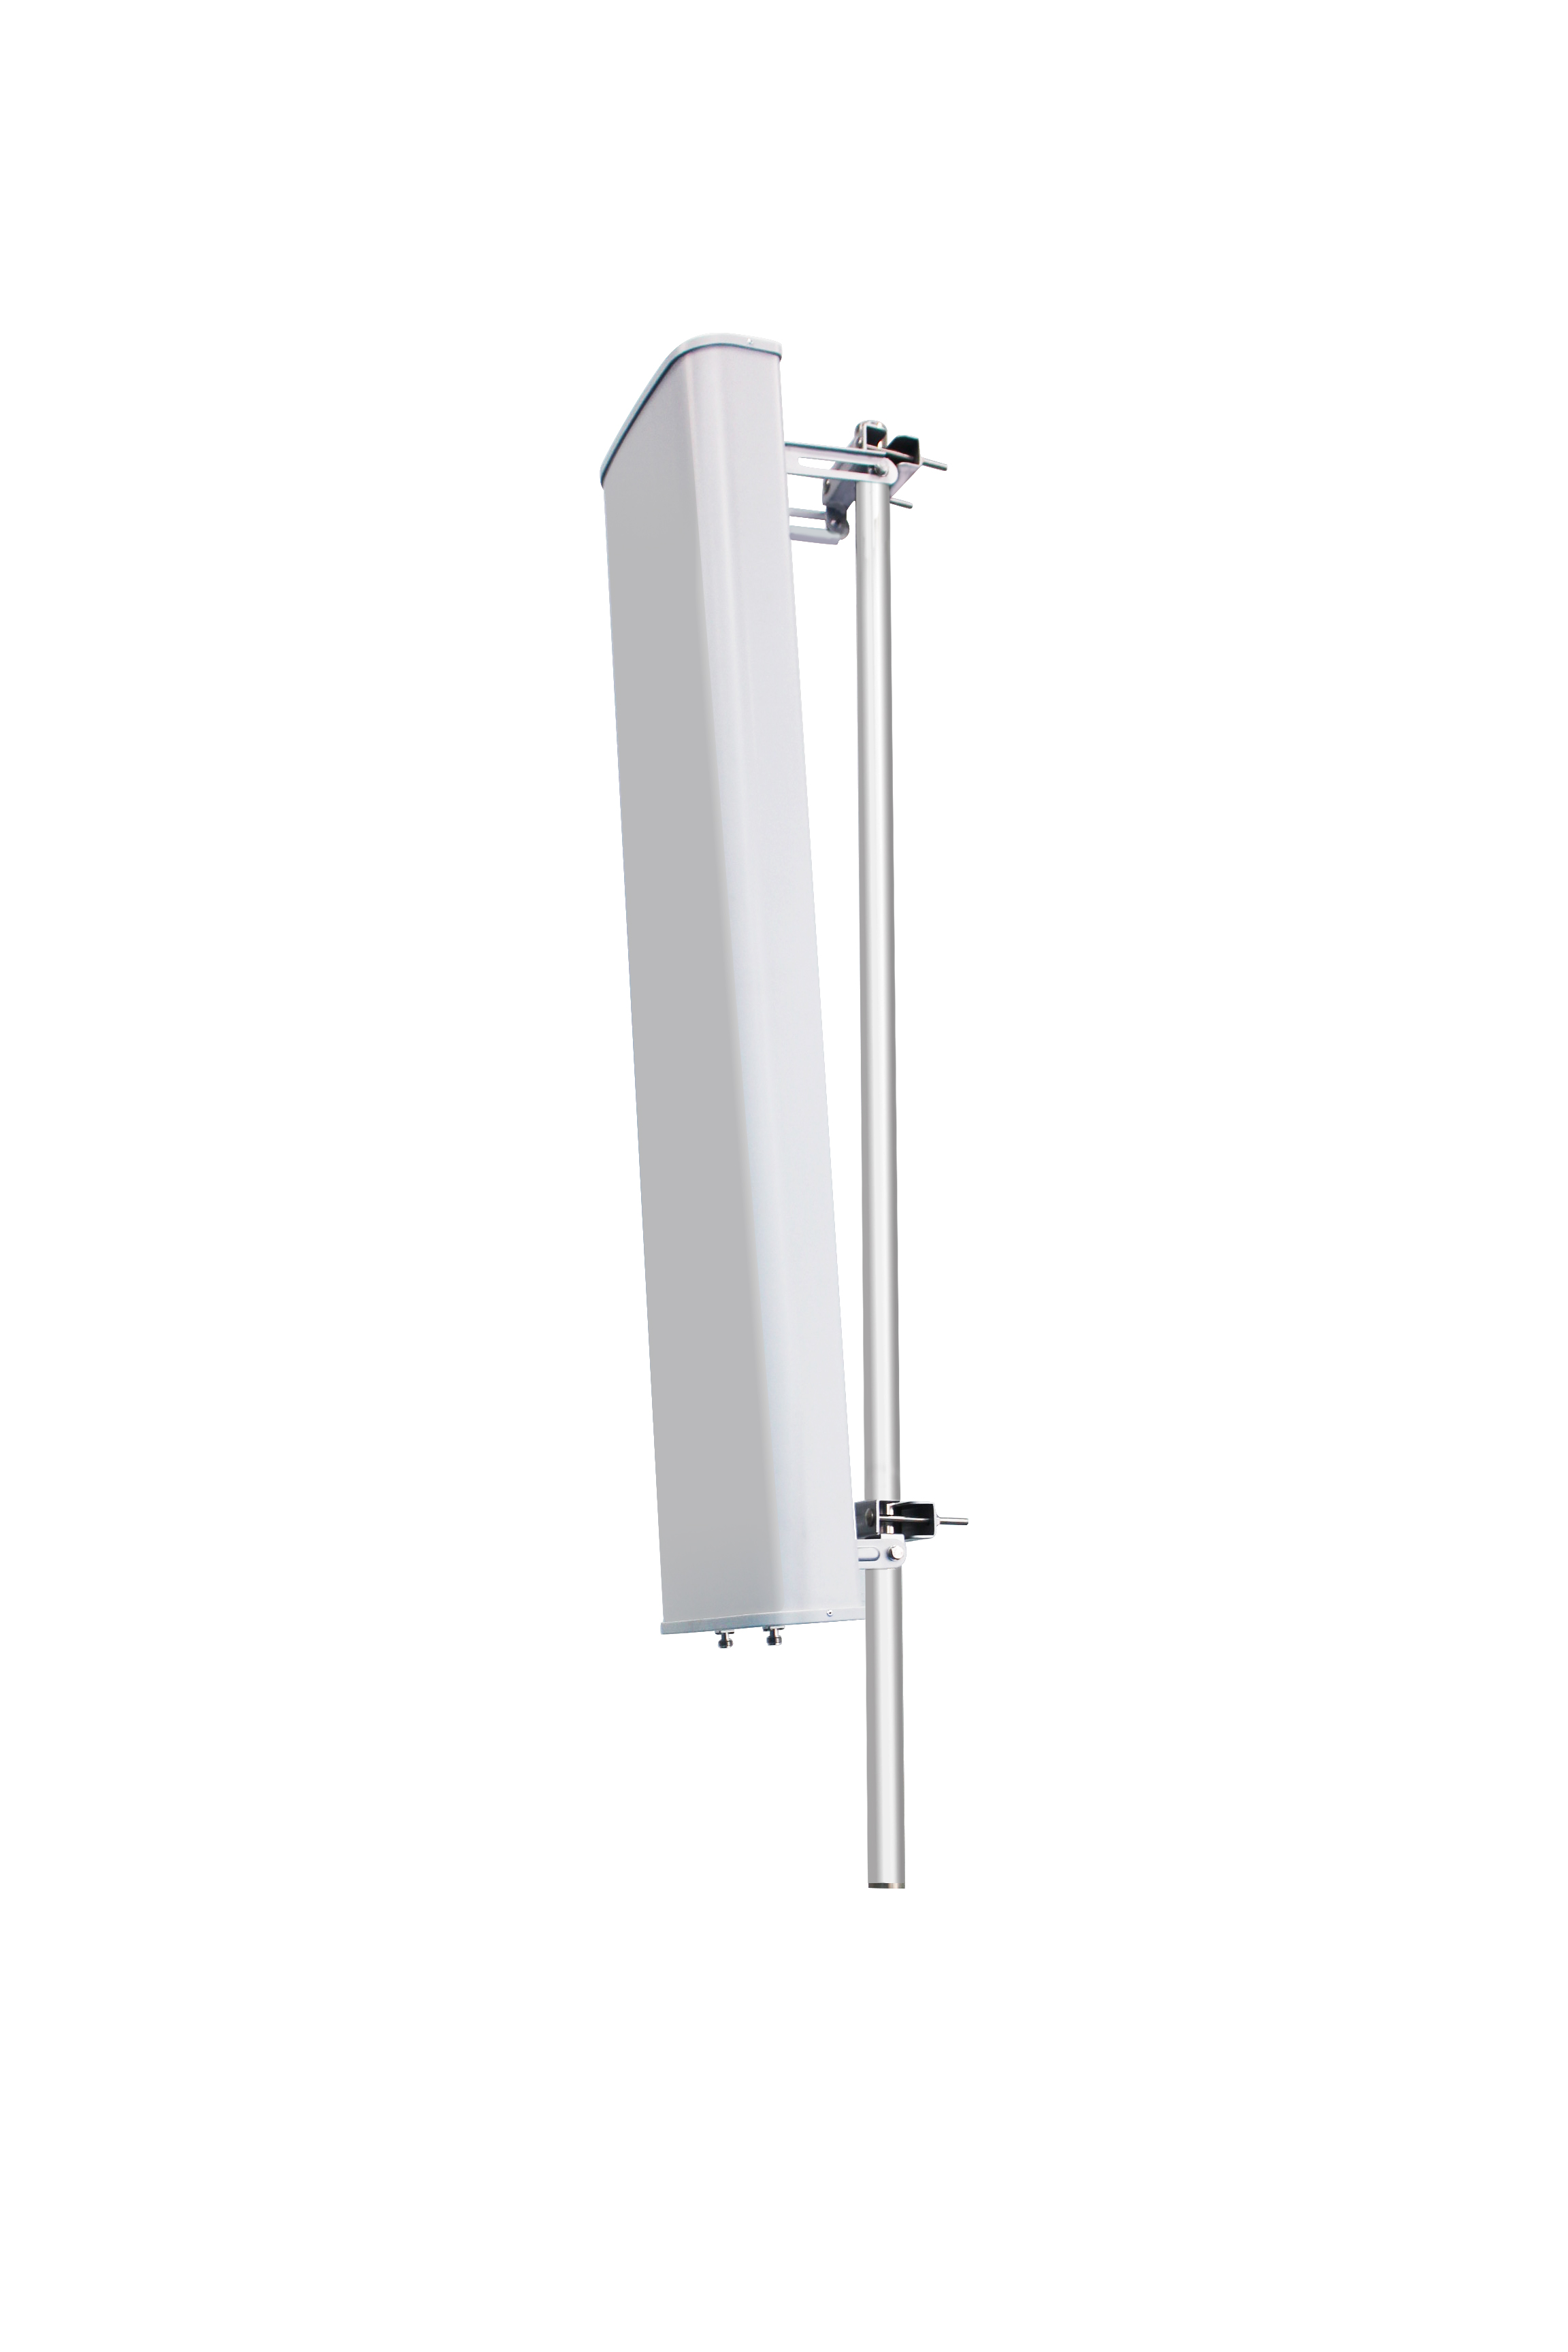 WiFi long distance signal coverage Wi-FI6 Outdoor Panel Sector Antenna